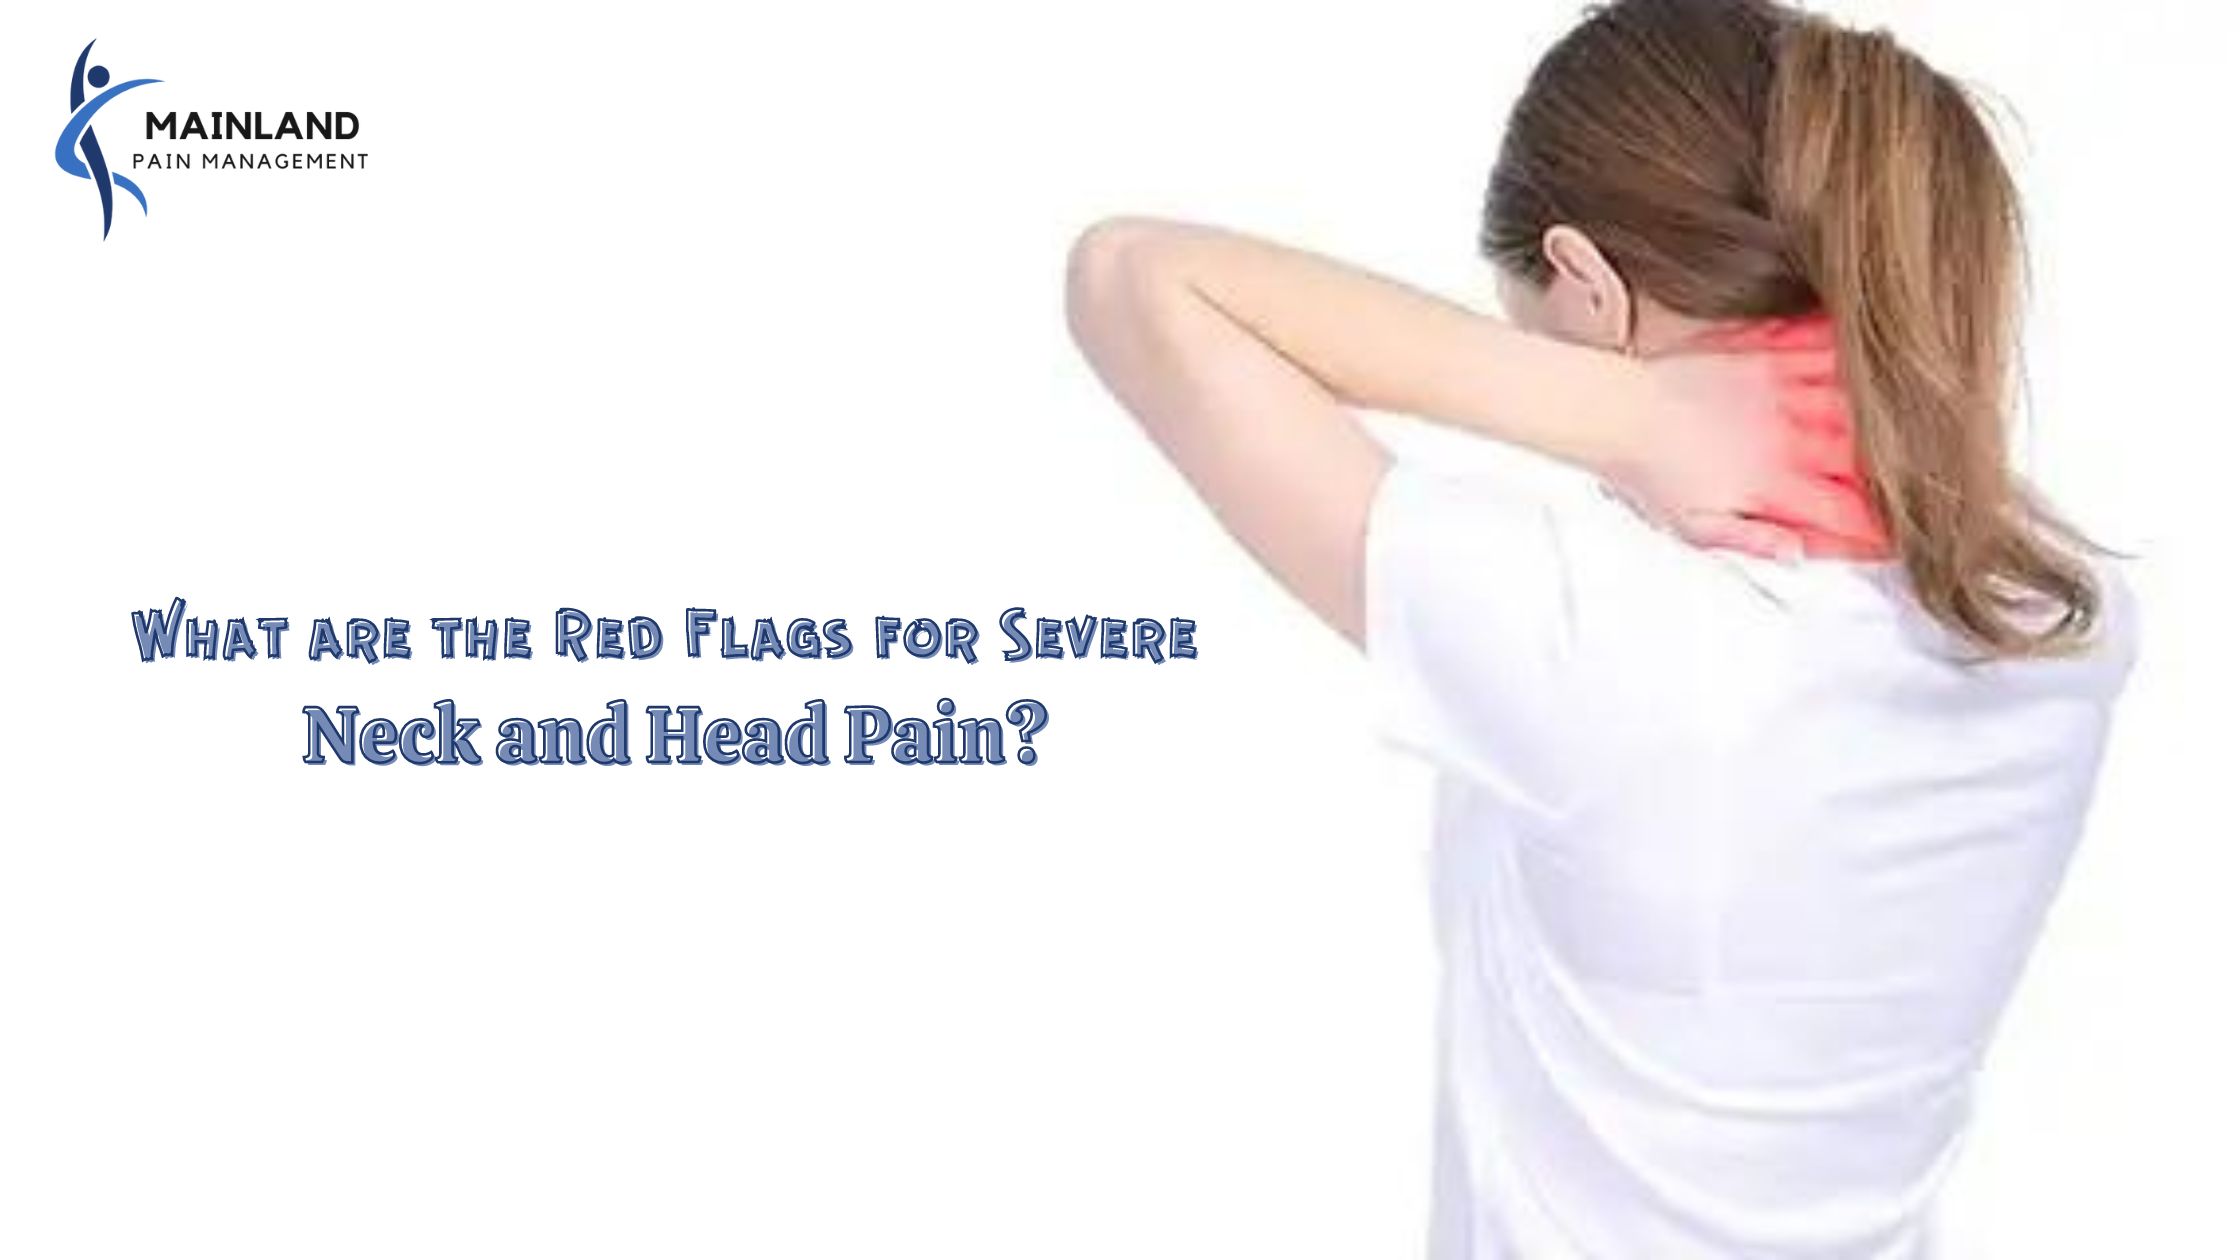 What are the Red Flags for Severe Neck and Head Pain